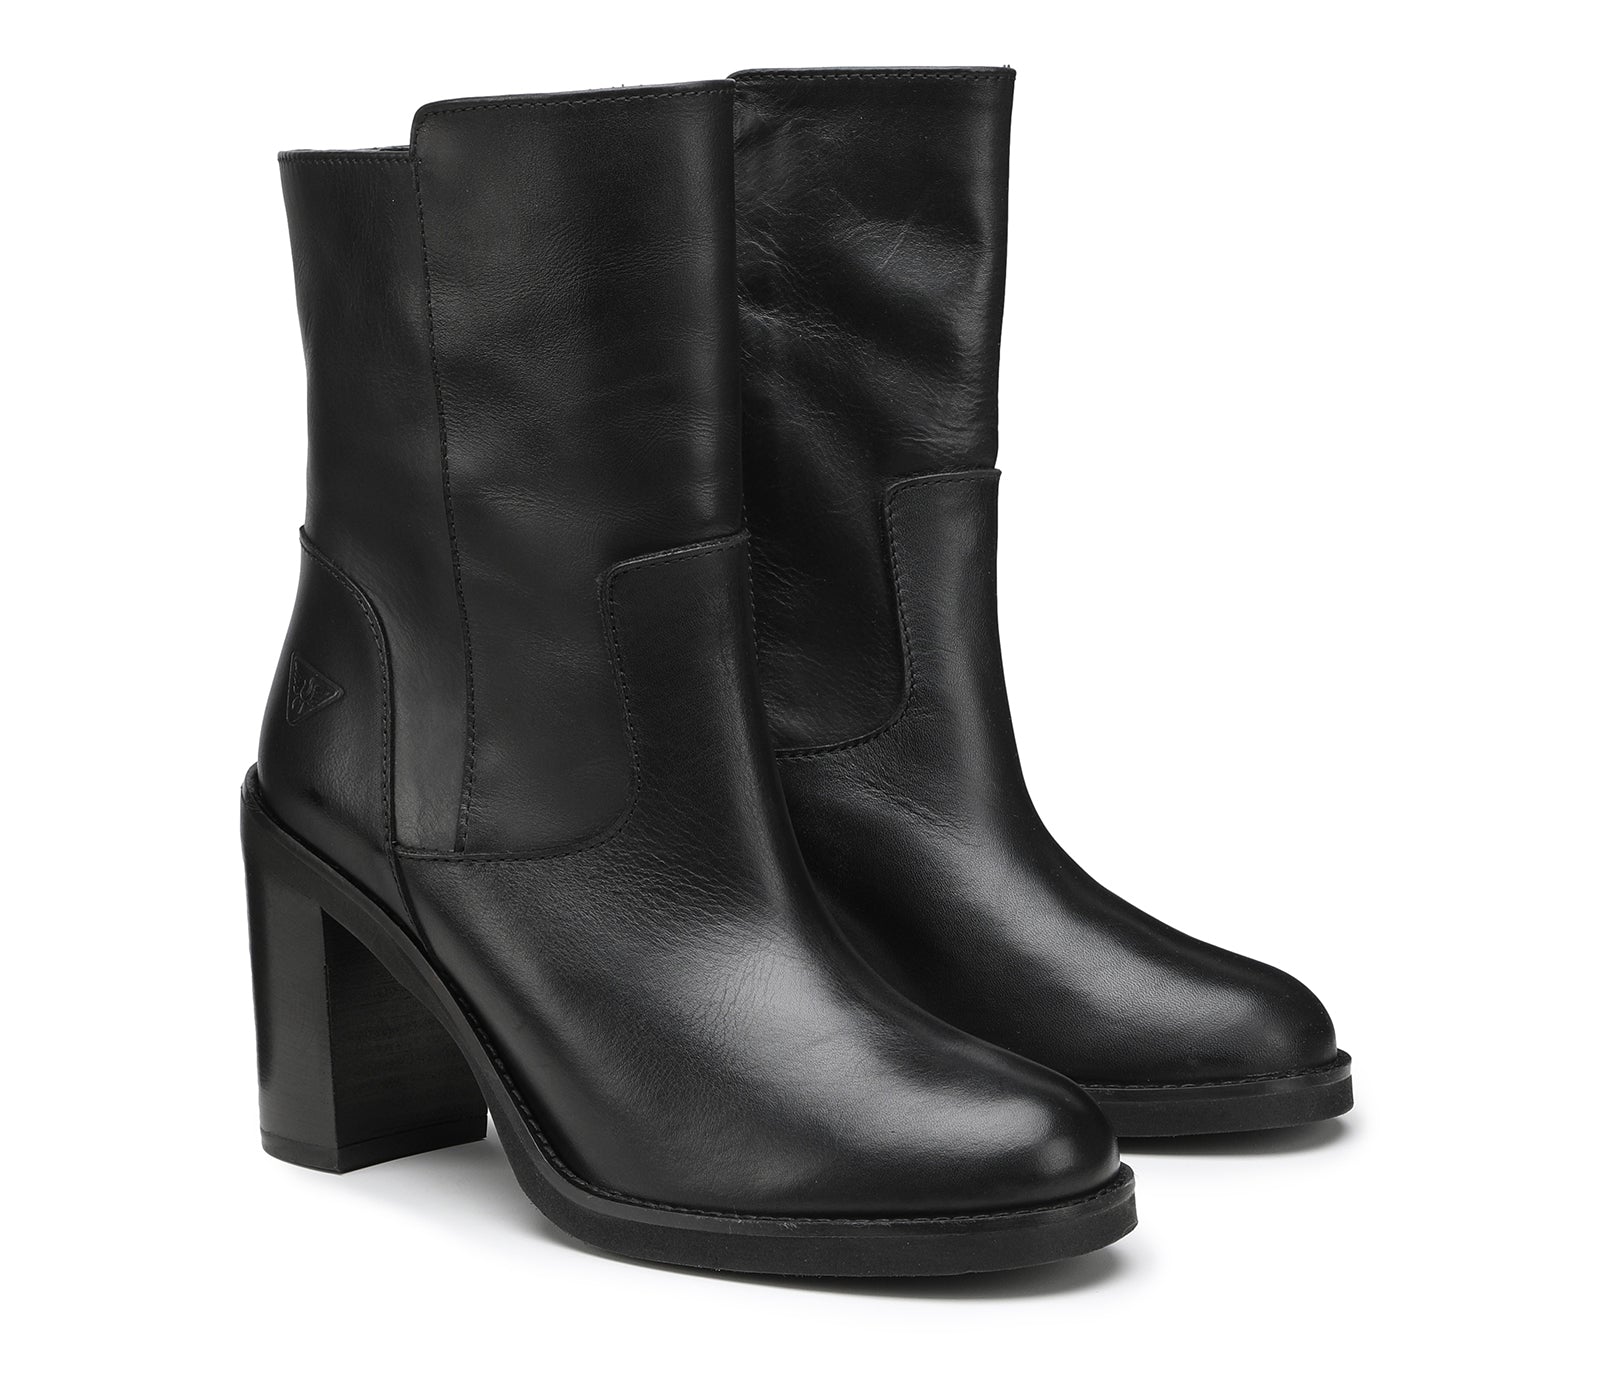 Women's Black Leather Boots with Wide Heel